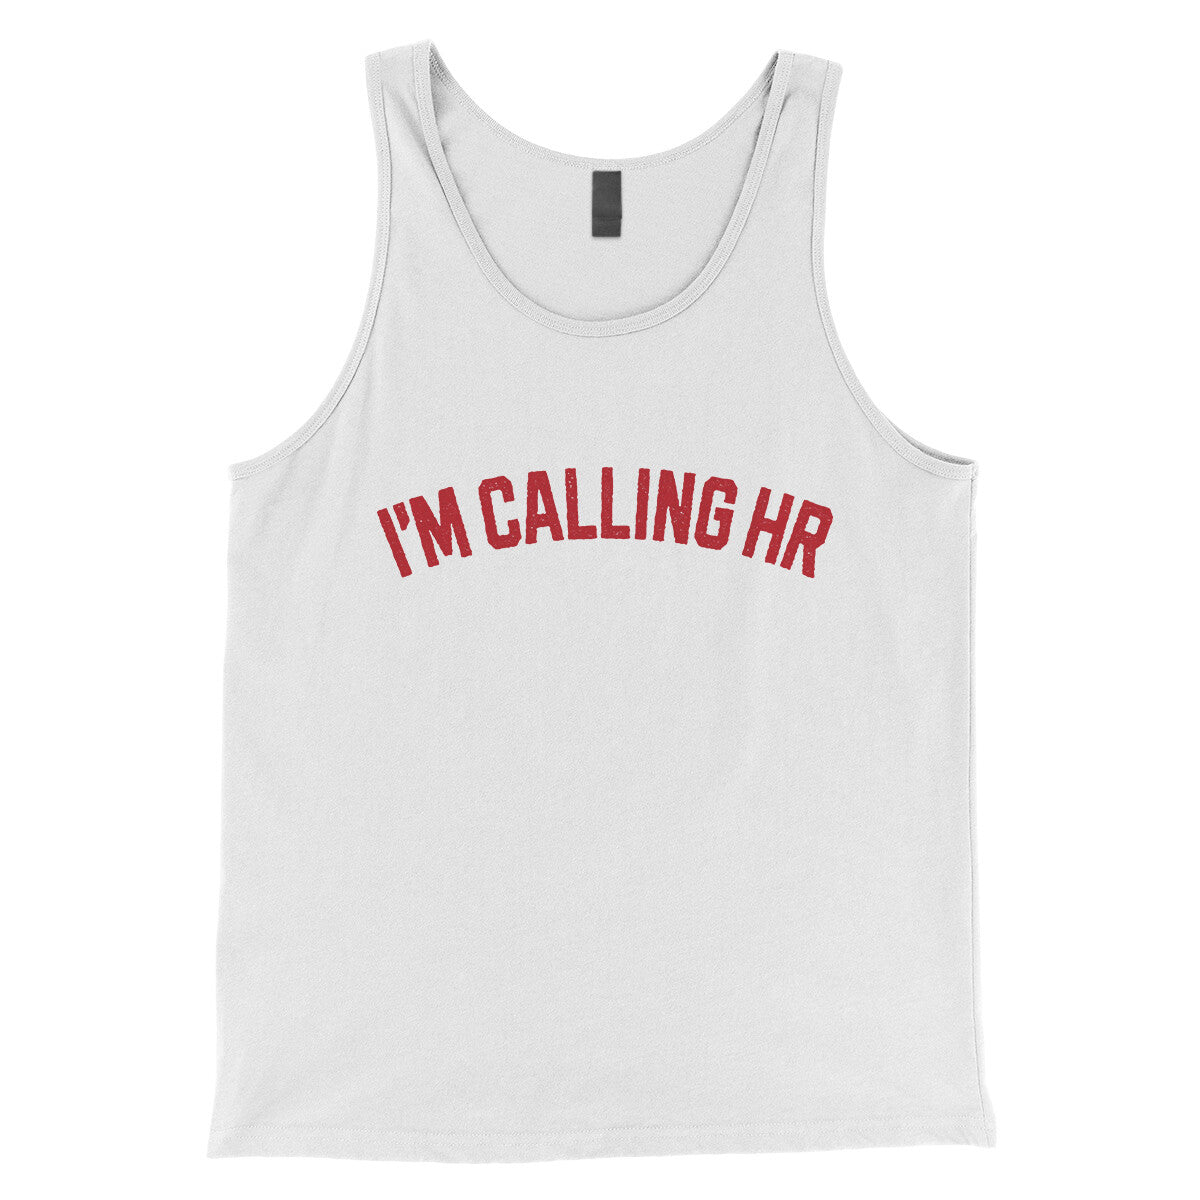 I'm Calling HR in White Color